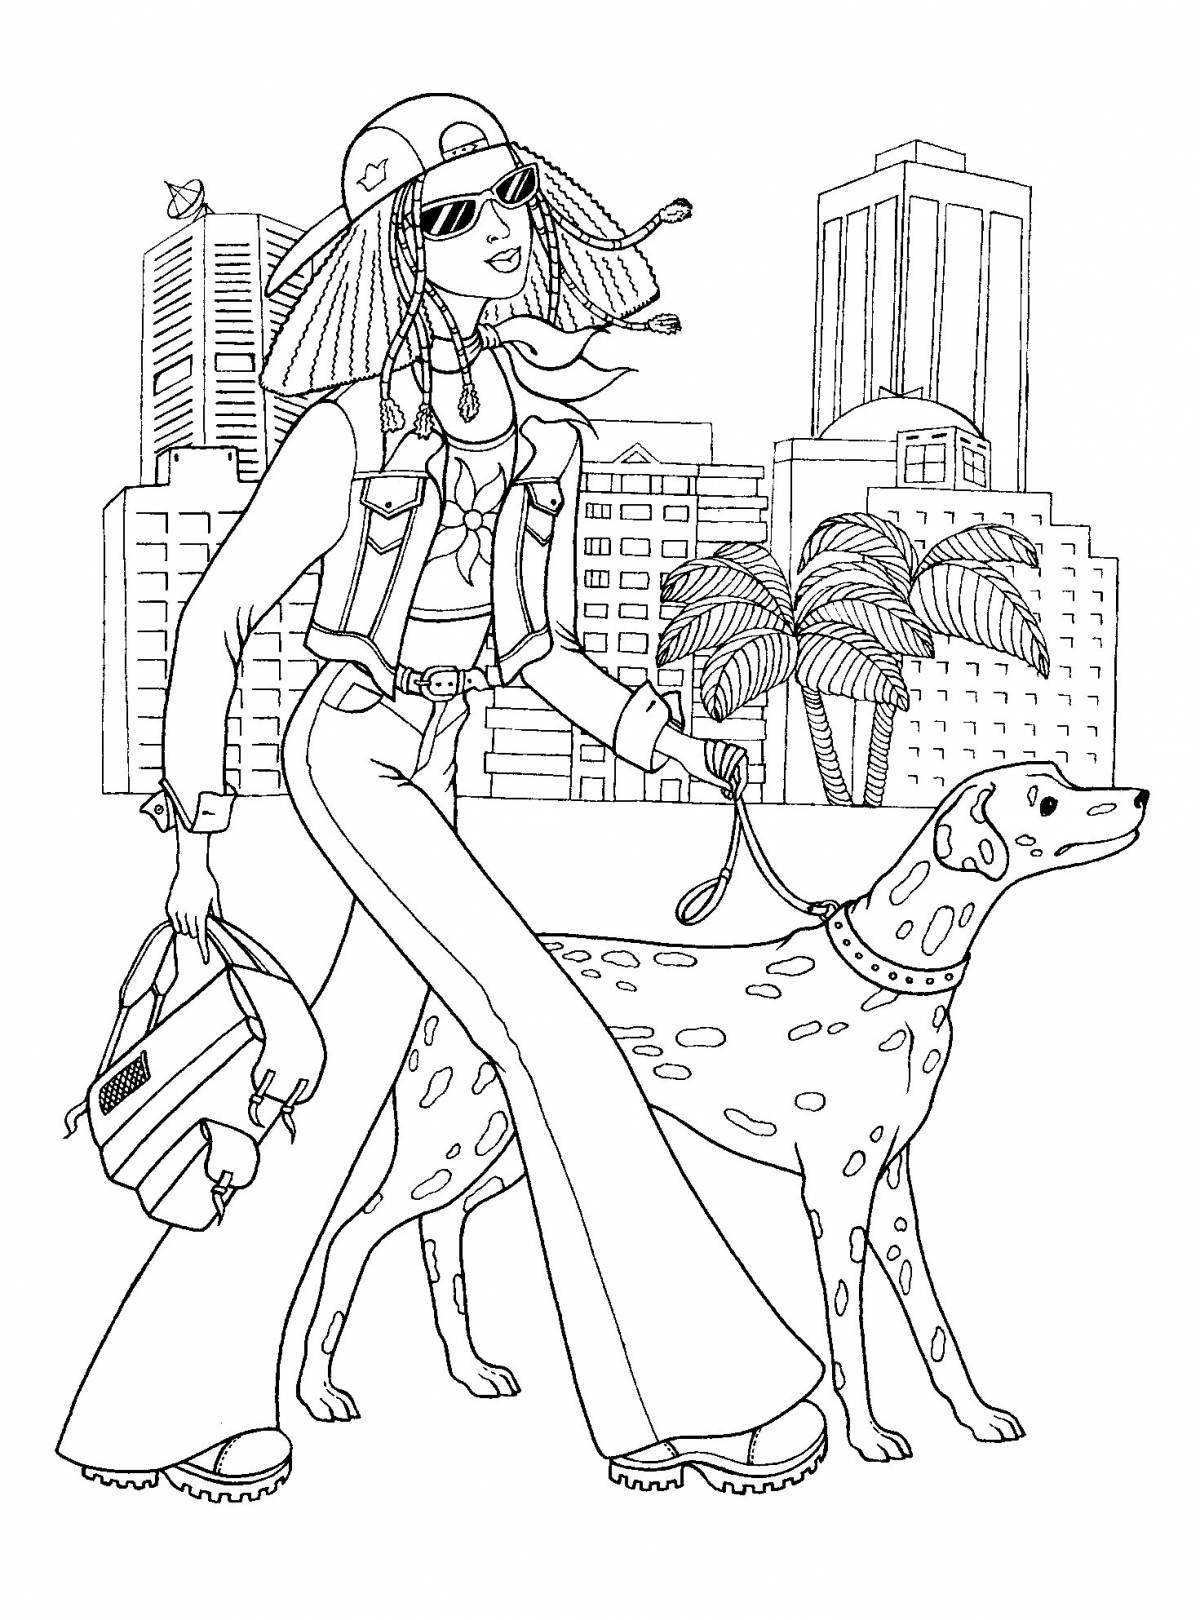 Coloring pages stylish girls are nice